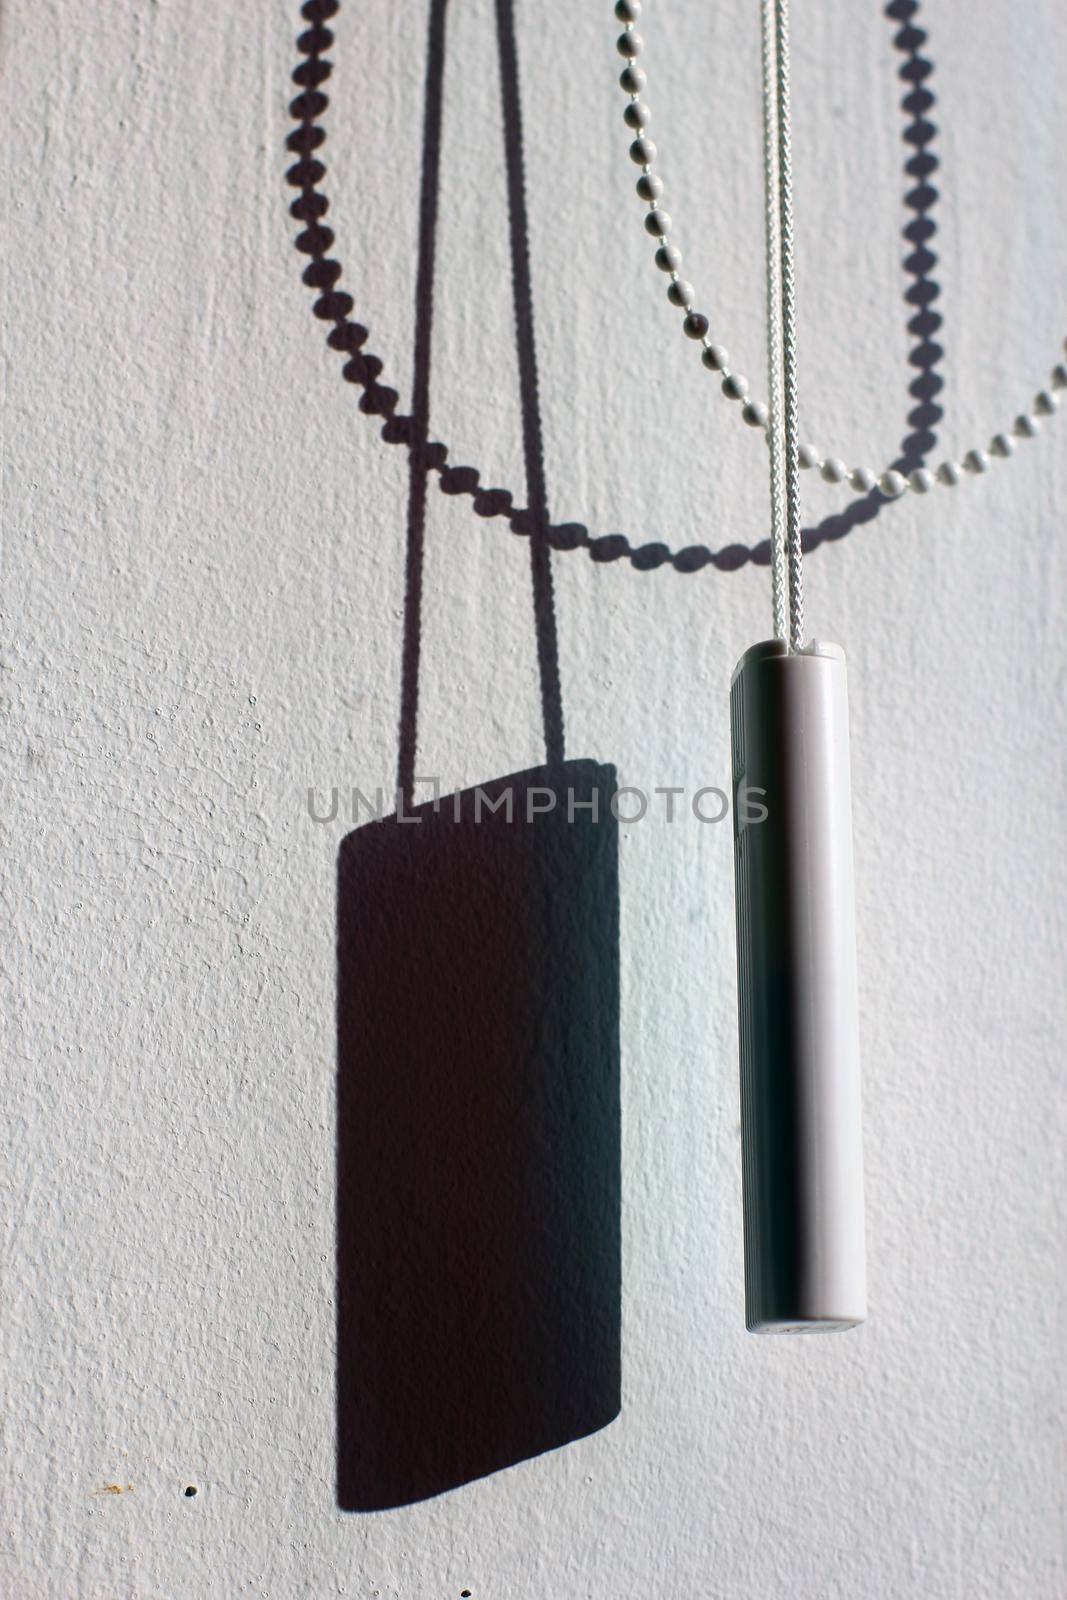 Blinds cord lift abstract background by Lirch